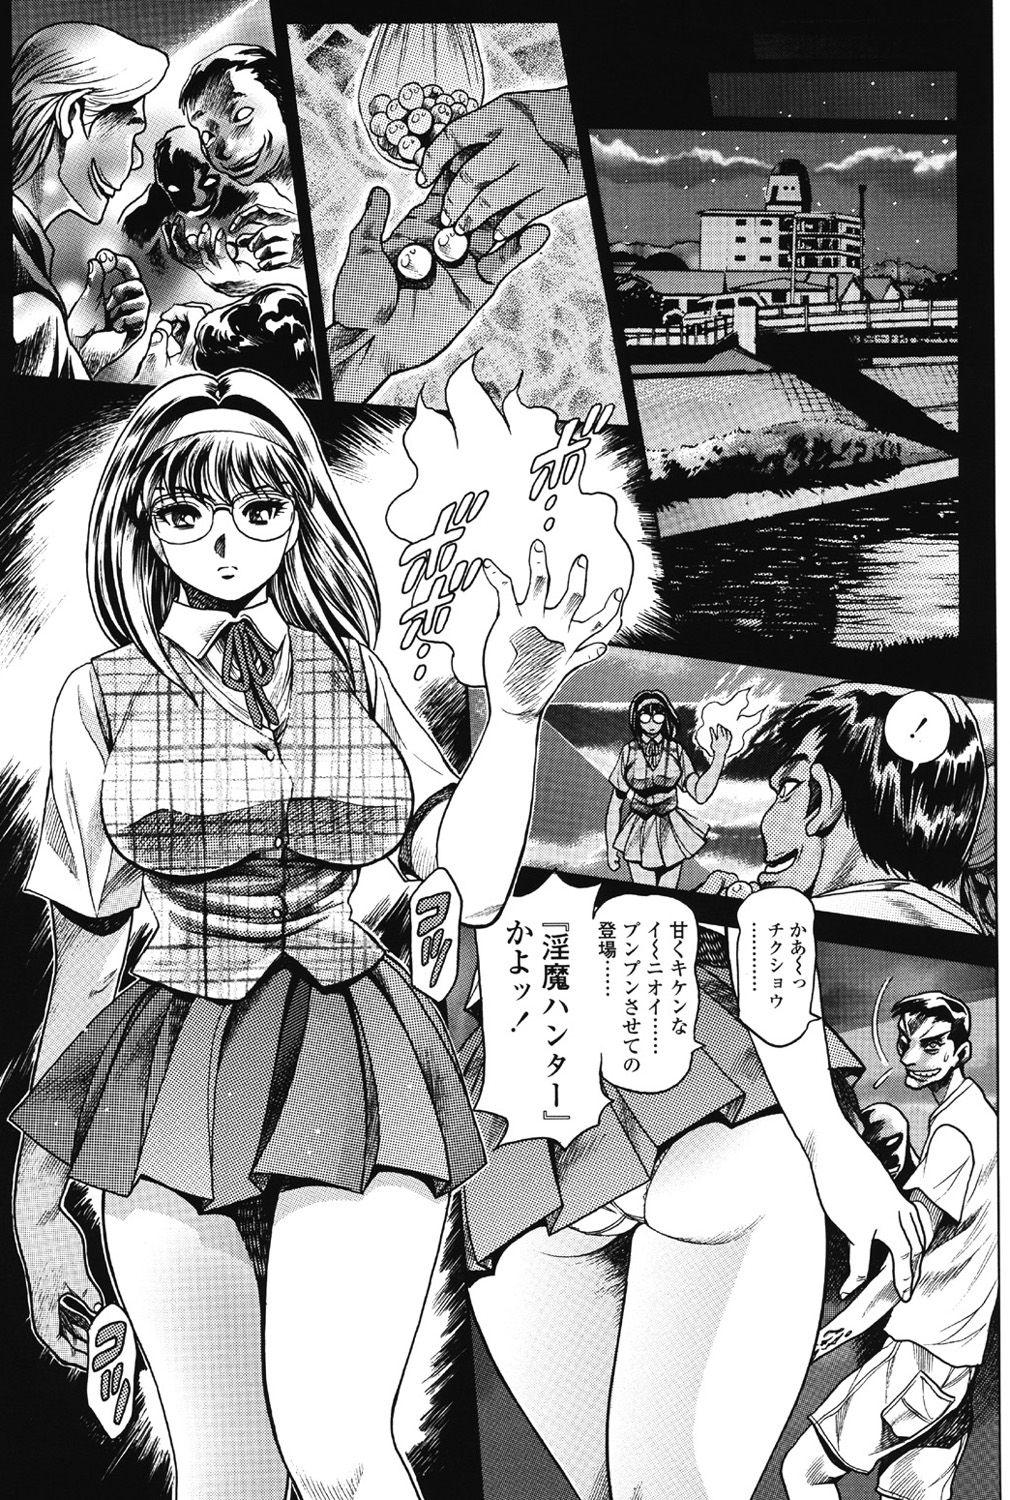 Sharing Nami SOS! 5 Previous Story Girls Another Days Keiko - 001 Perfect Butt - Page 1